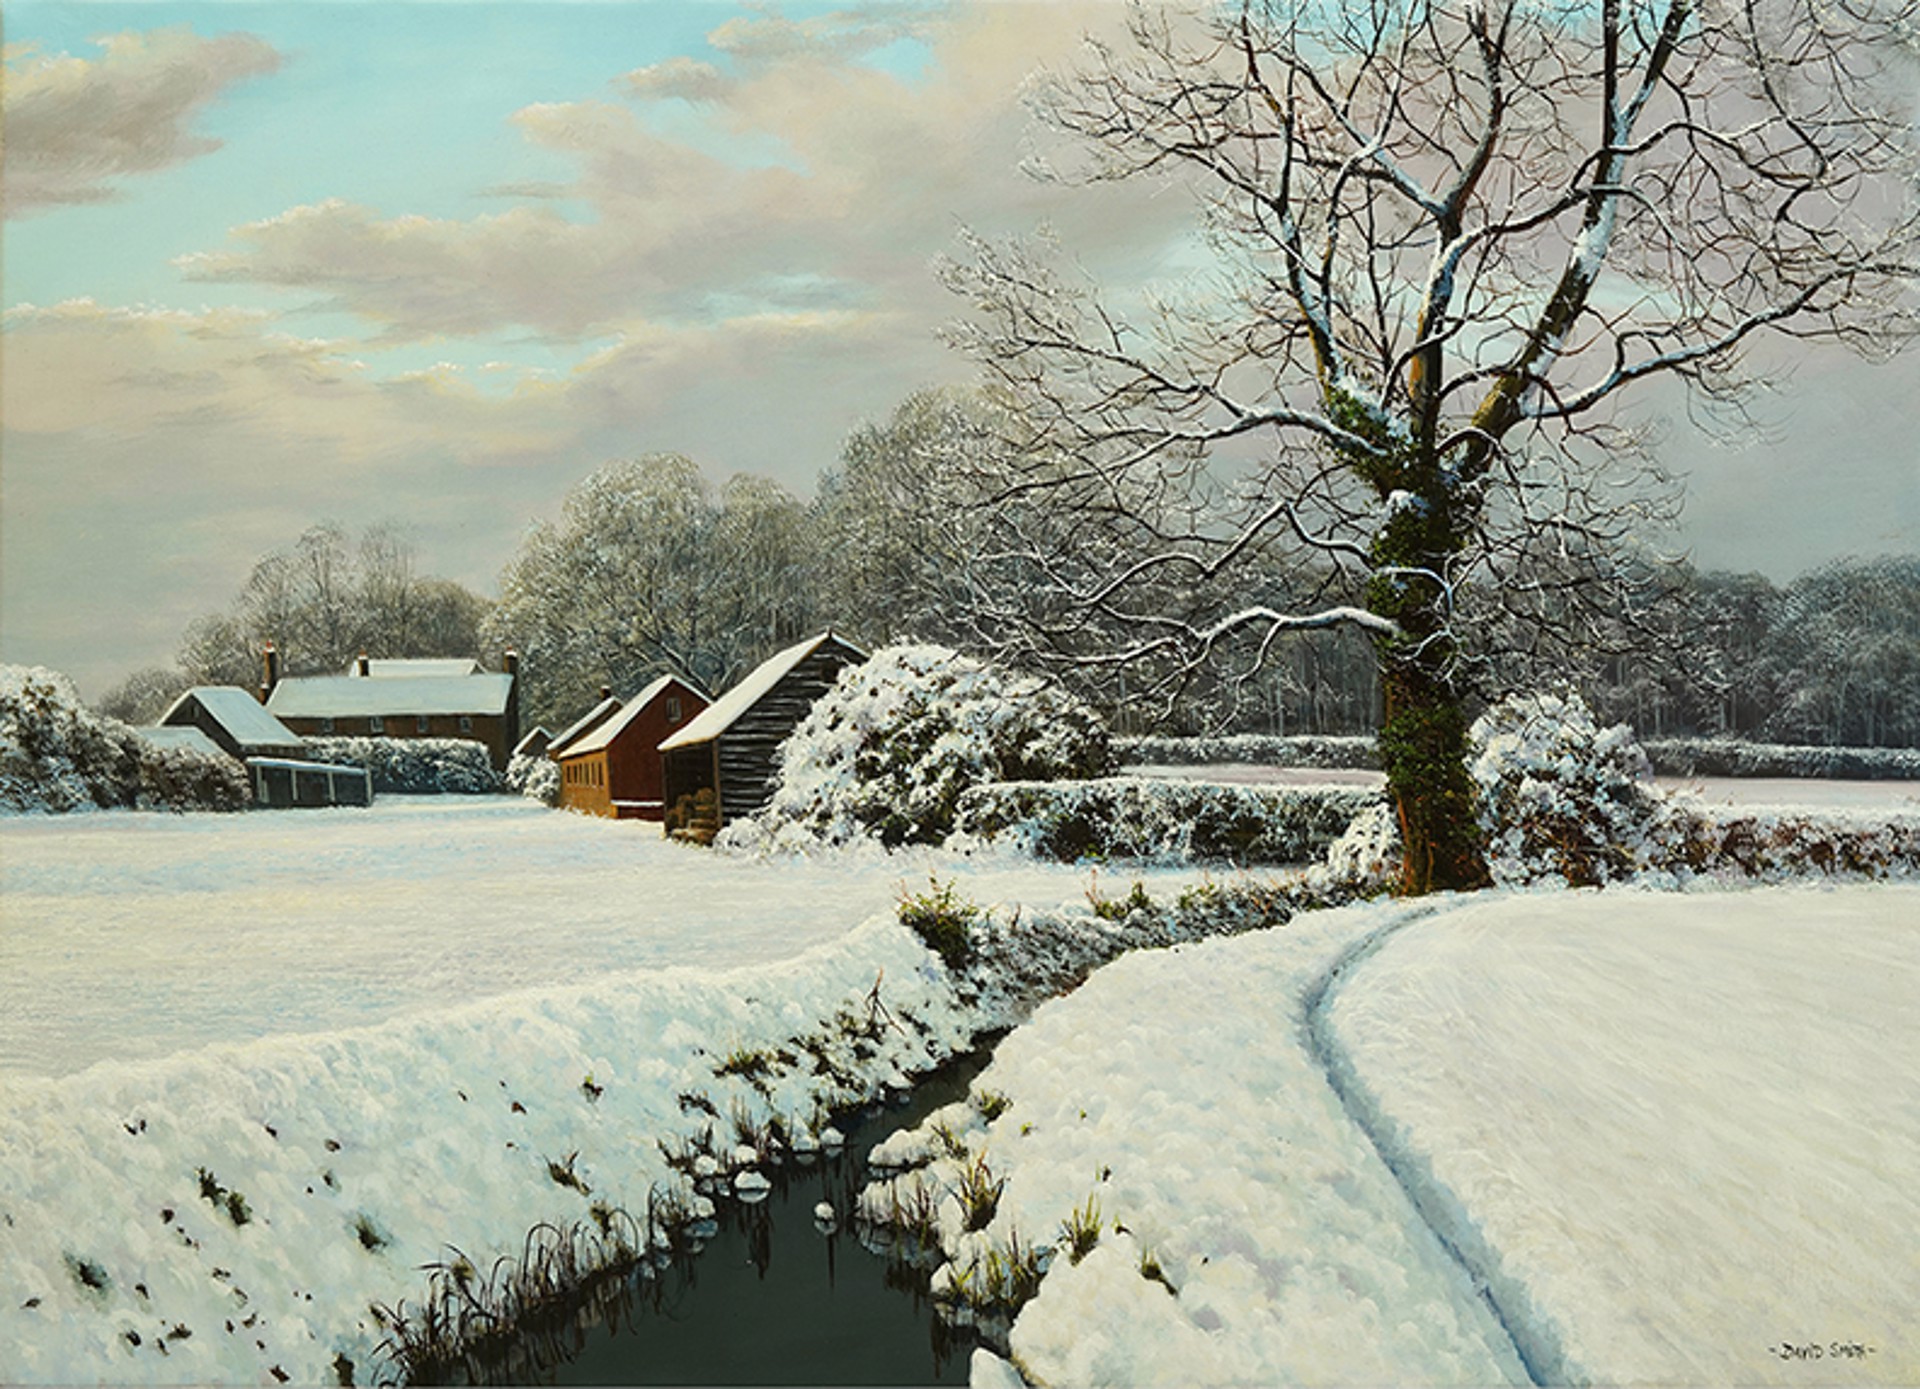 Snow in Essex by David Smith